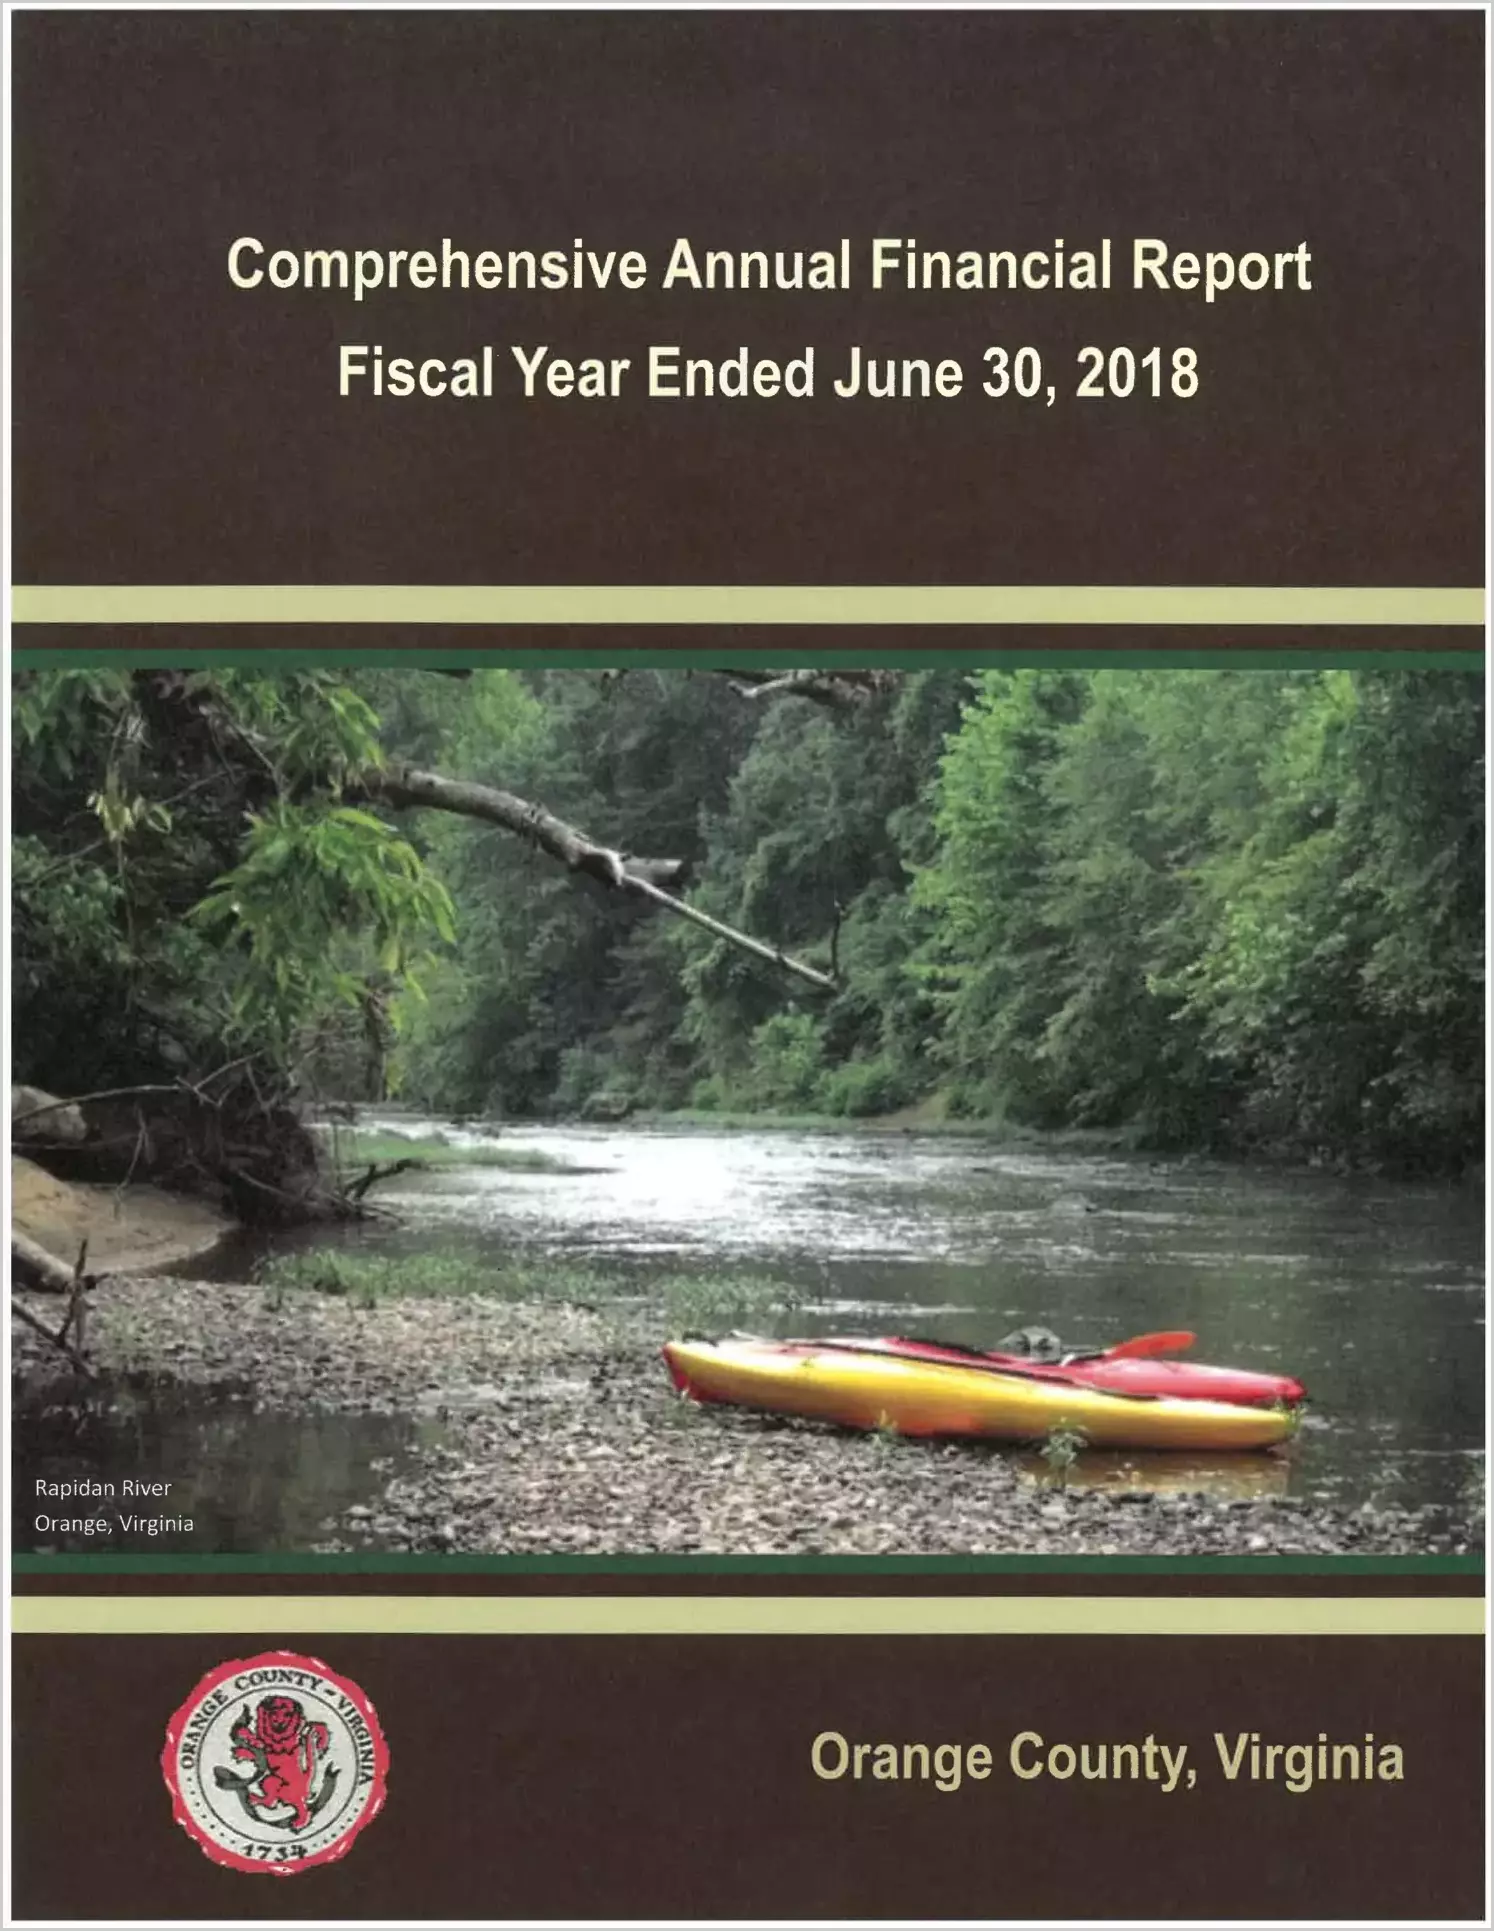 2018 Annual Financial Report for County of Orange